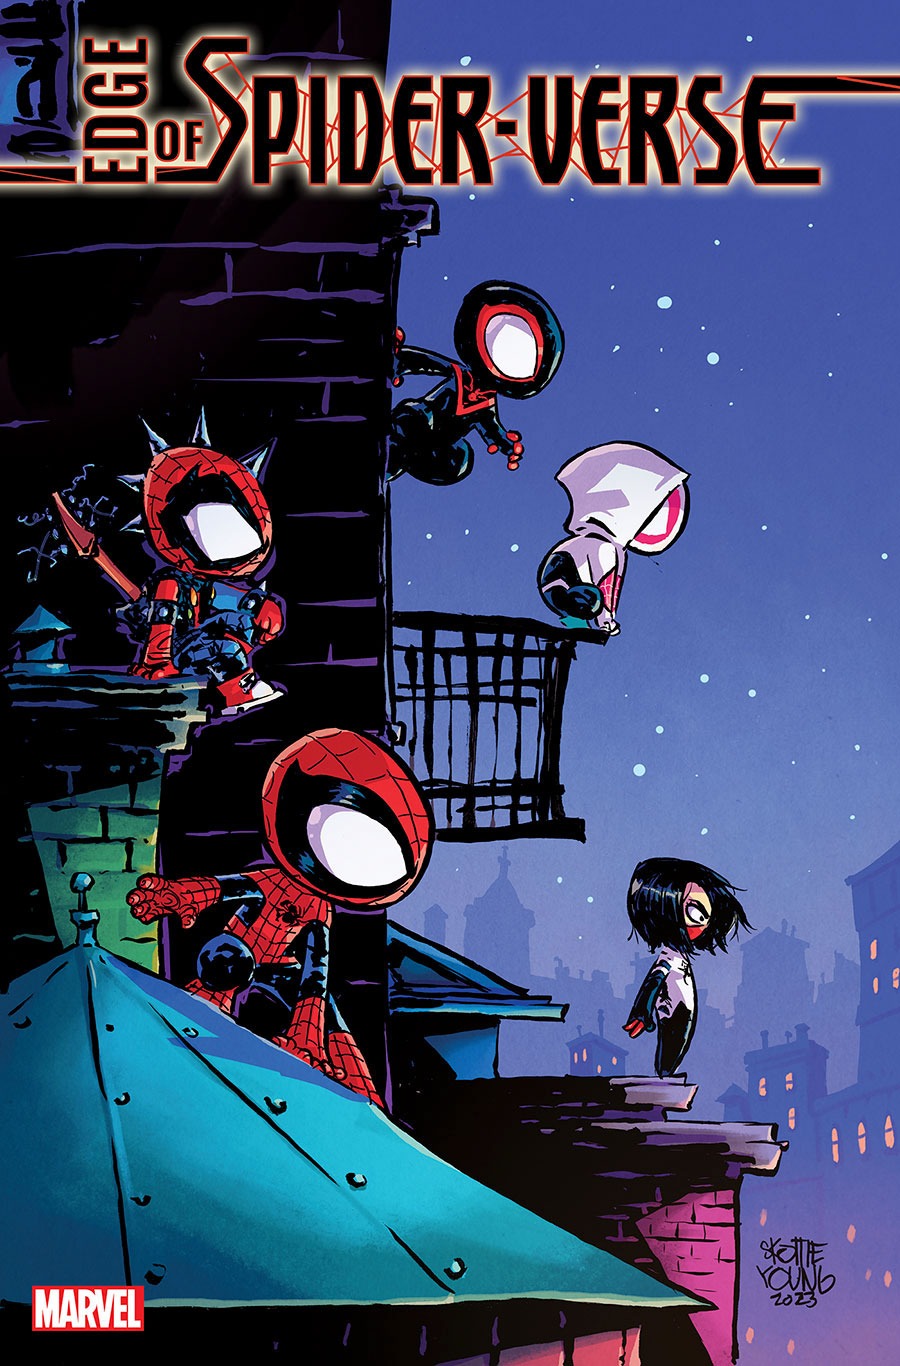 Edge Of Spider-Verse Vol 4 #1 Cover D Variant Skottie Young Cover (Limit 1 Per Customer)